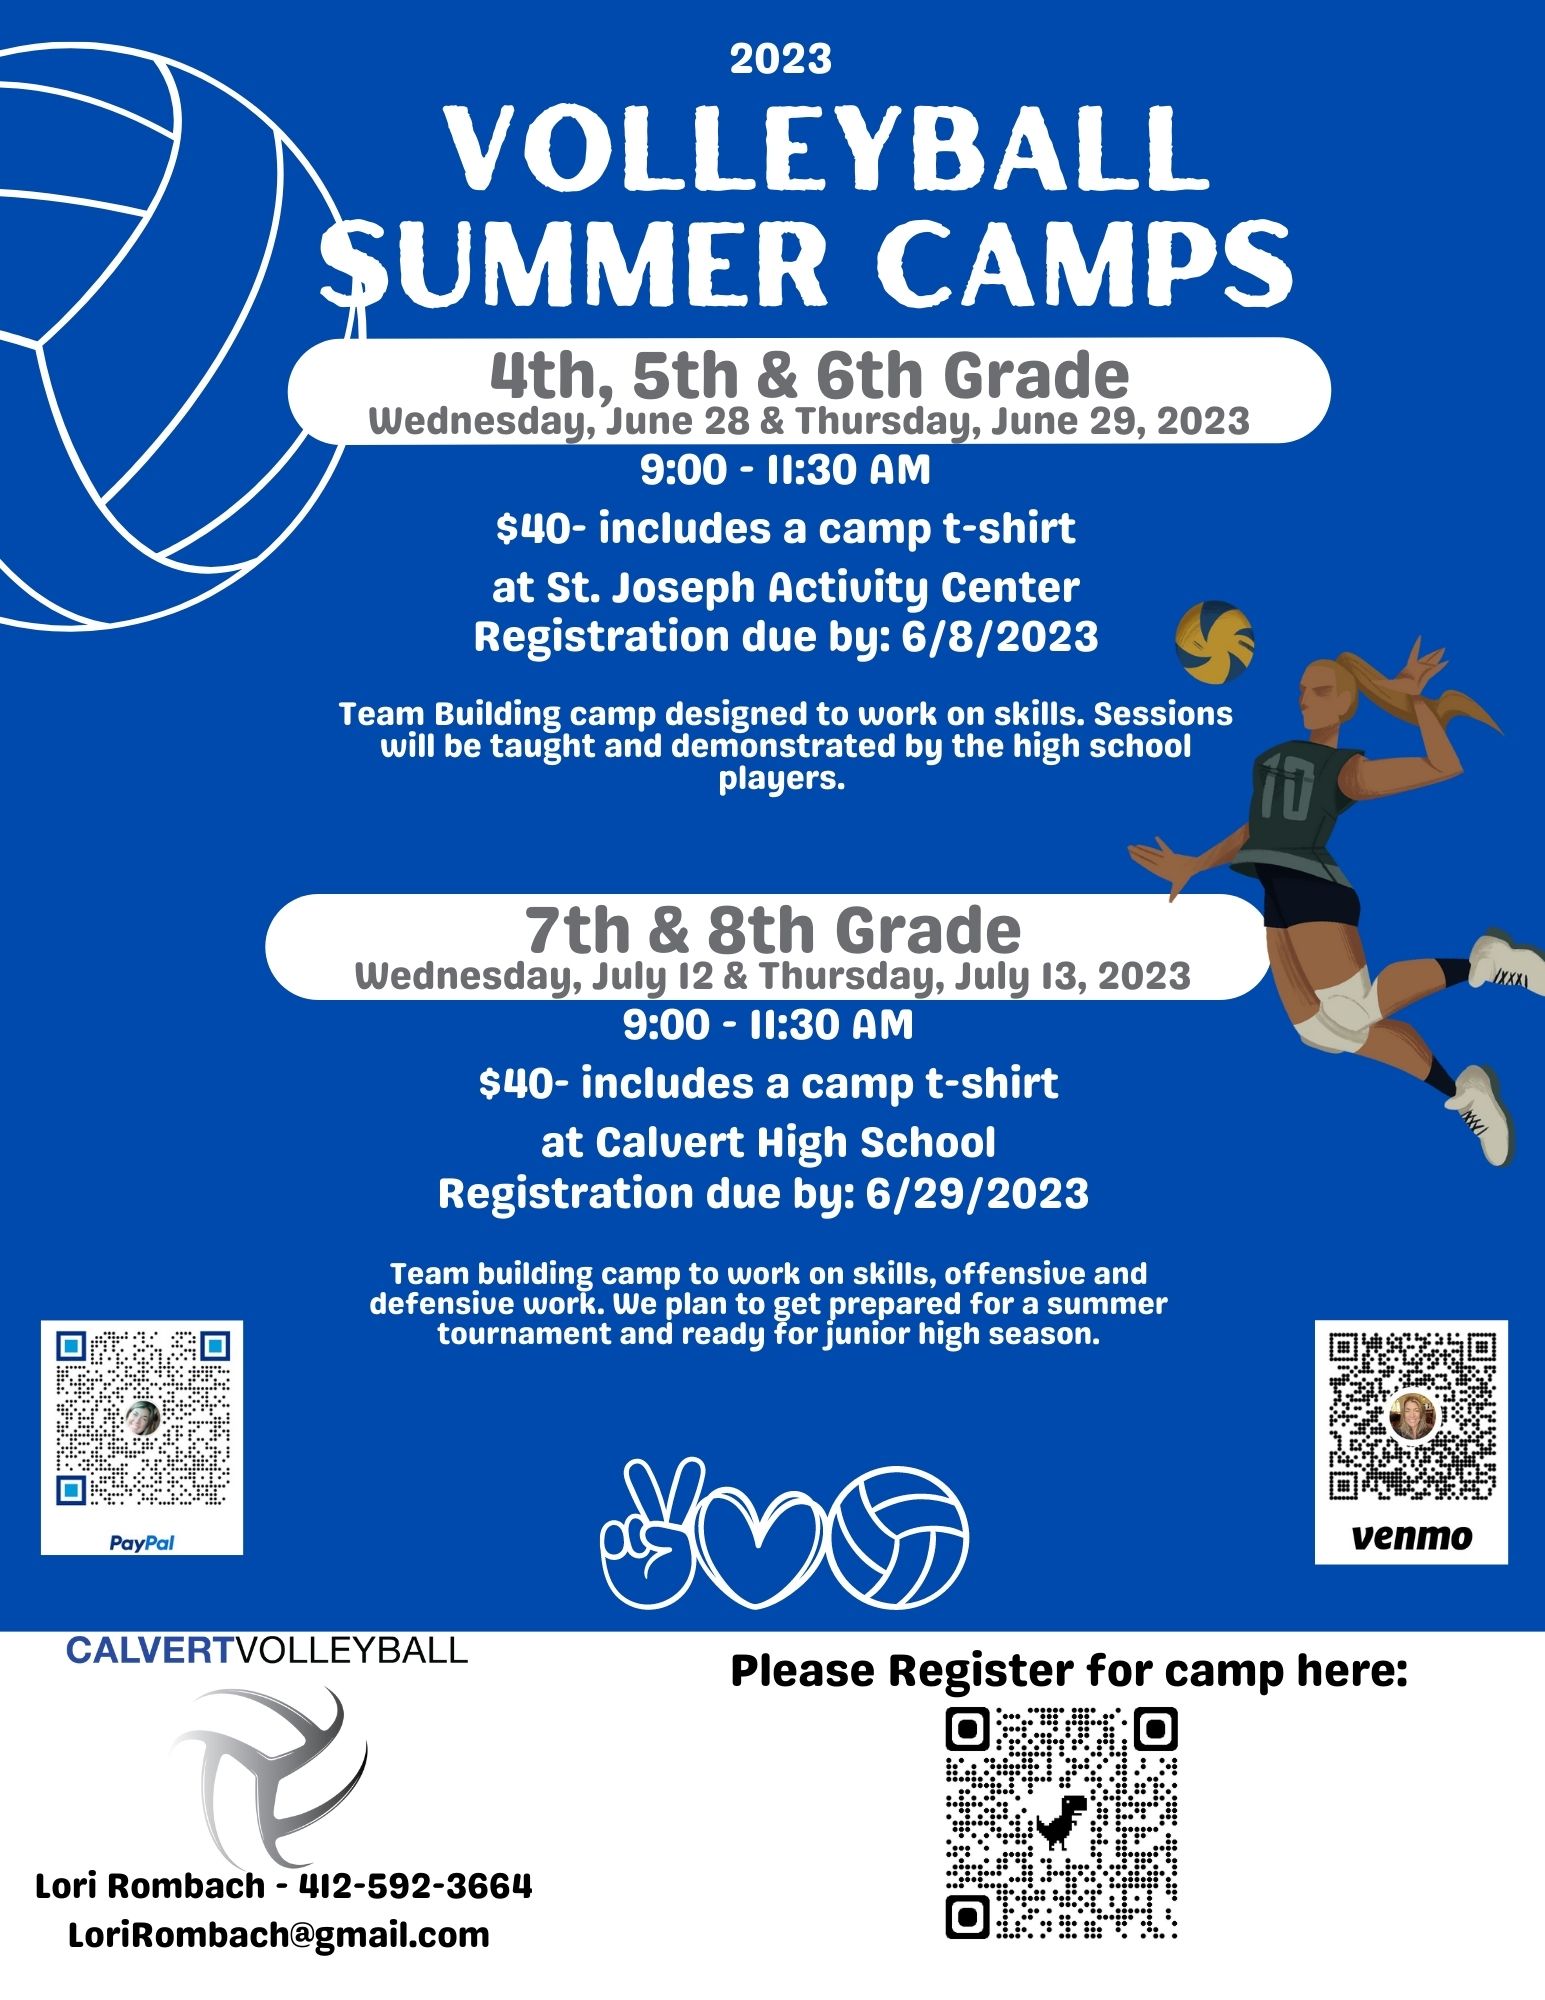 Volleyball Summer Camps